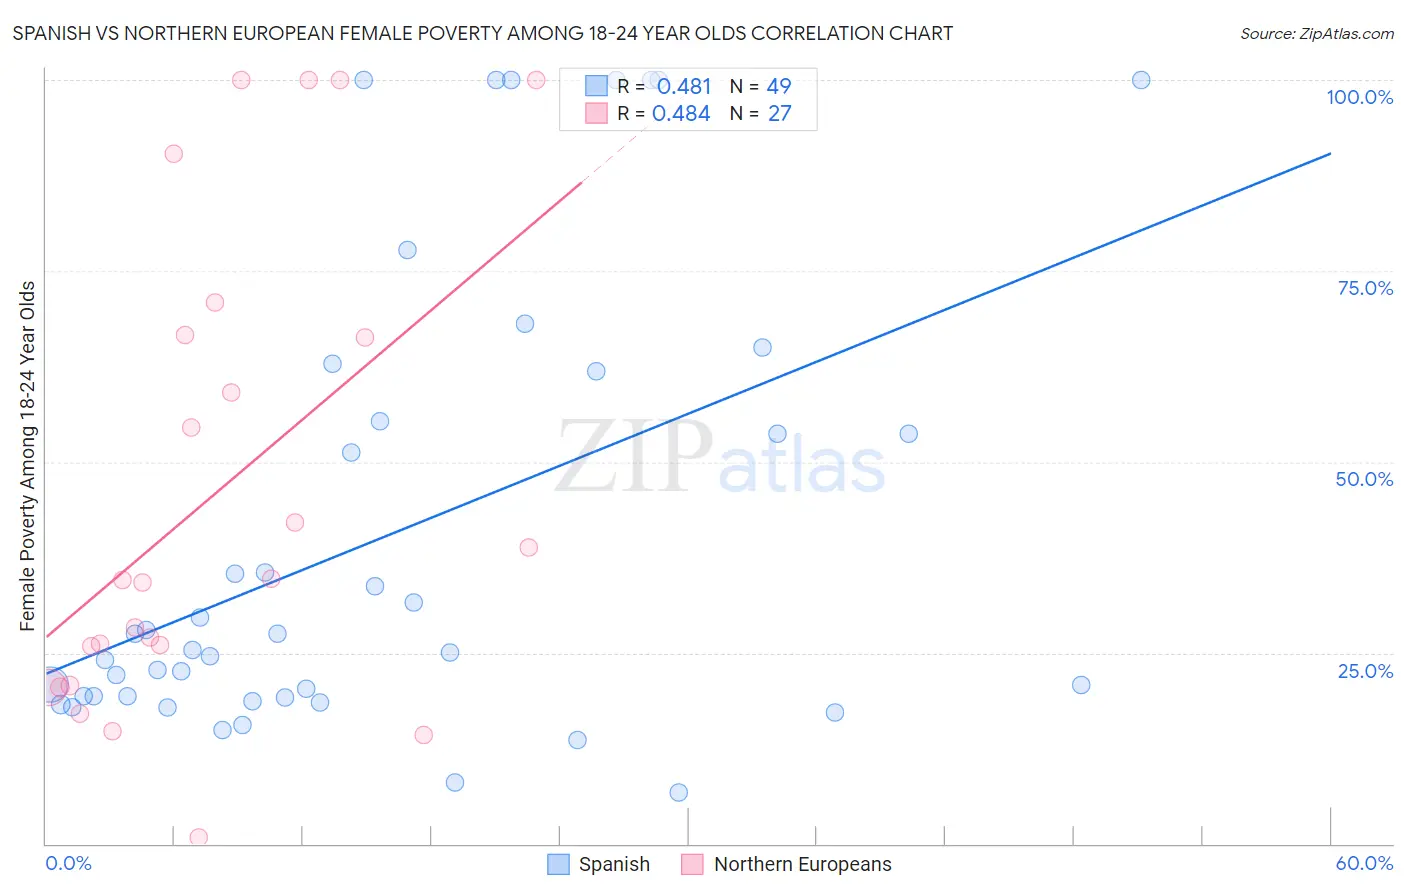 Spanish vs Northern European Female Poverty Among 18-24 Year Olds